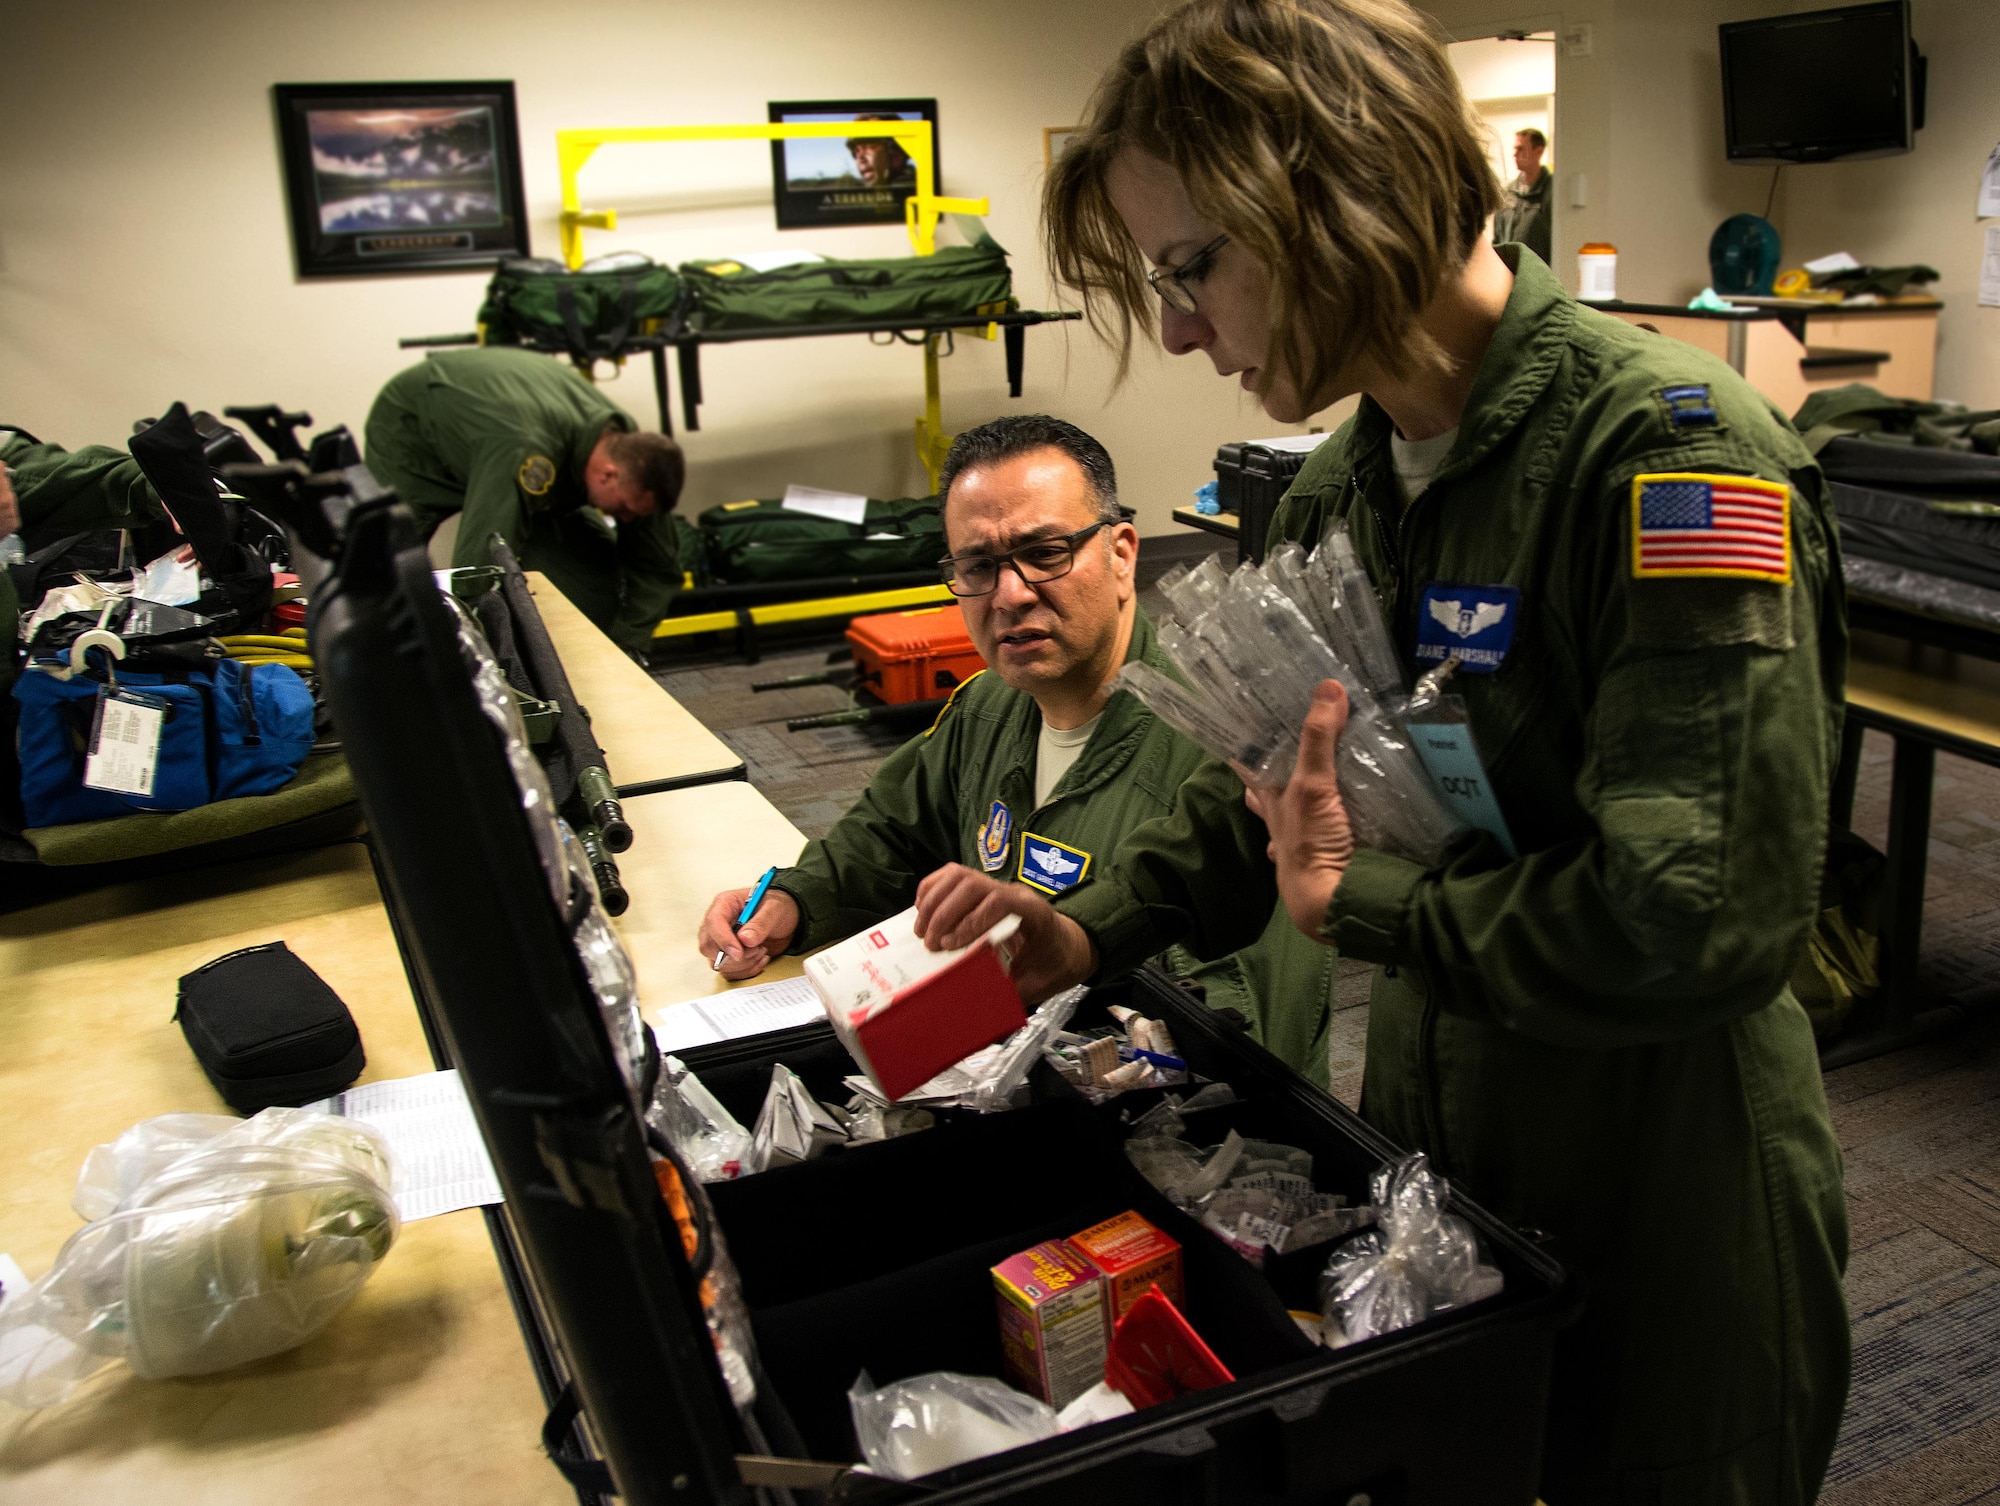 Senior Master Sgt. Gabriel Aguilar, 349th Aeromedical Evacuation Squadron superintendent of nursing services, and Capt. Diane Marshall, 932nd Aeromedical Evacuation Squadron flight nurse, perform inventory on medical equipment during Patriot Delta at Travis Air Force Base, Calif. on March 24, 2017. Patriot Delta brought in aeromedical evacuations squadrons from the from the 911th Airlift Wing at Pittsburgh Air Reserve Station, Penn., the 908th AW at Maxwell Air Force Base, Miss.; the 932d Airlift Wing at Scott AFB, Ill.; and the 349th Air Mobility Wing at Travis AFB. (U.S. Air Force photo by Staff Sgt. Daniel Phelps)